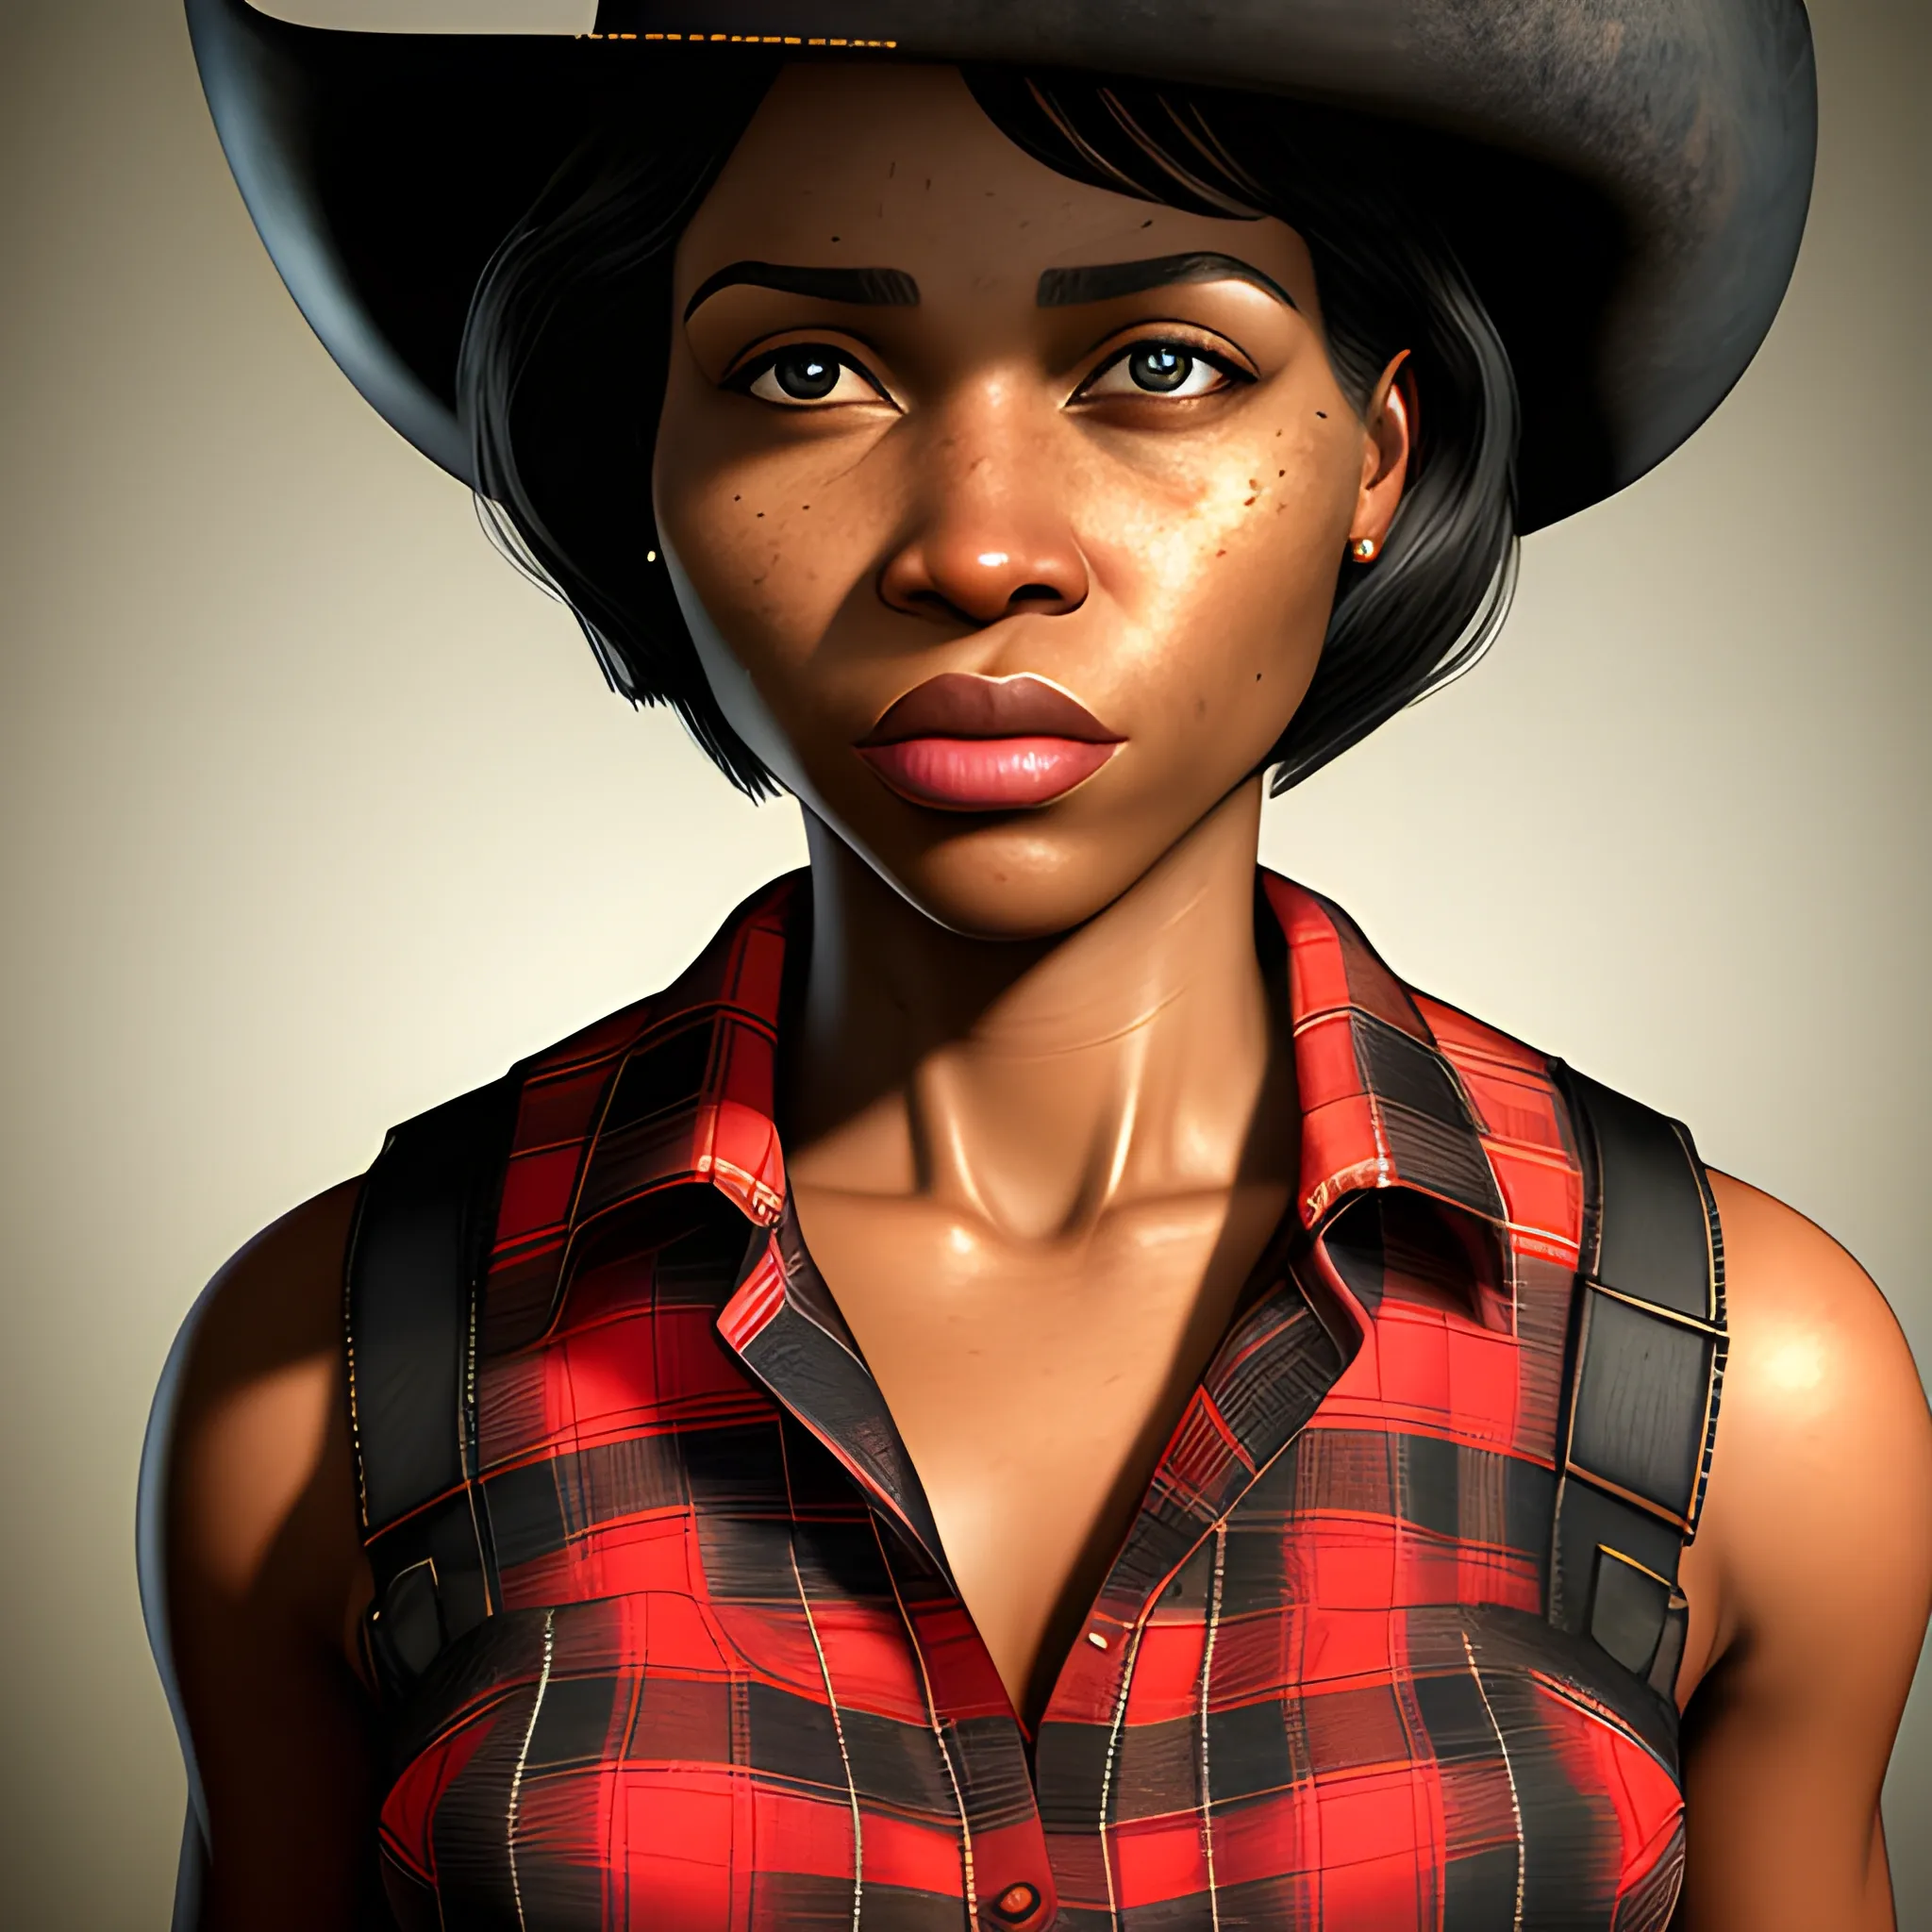 In the style of fallout 1, (masterpiece), (portrait photography), (portrait of an adult African-American female), no makeup, flat chested, white sports bra, cowboy hat, unbuttoned red flannel shirt, bob-cut hairstyle, black hair, black eyes